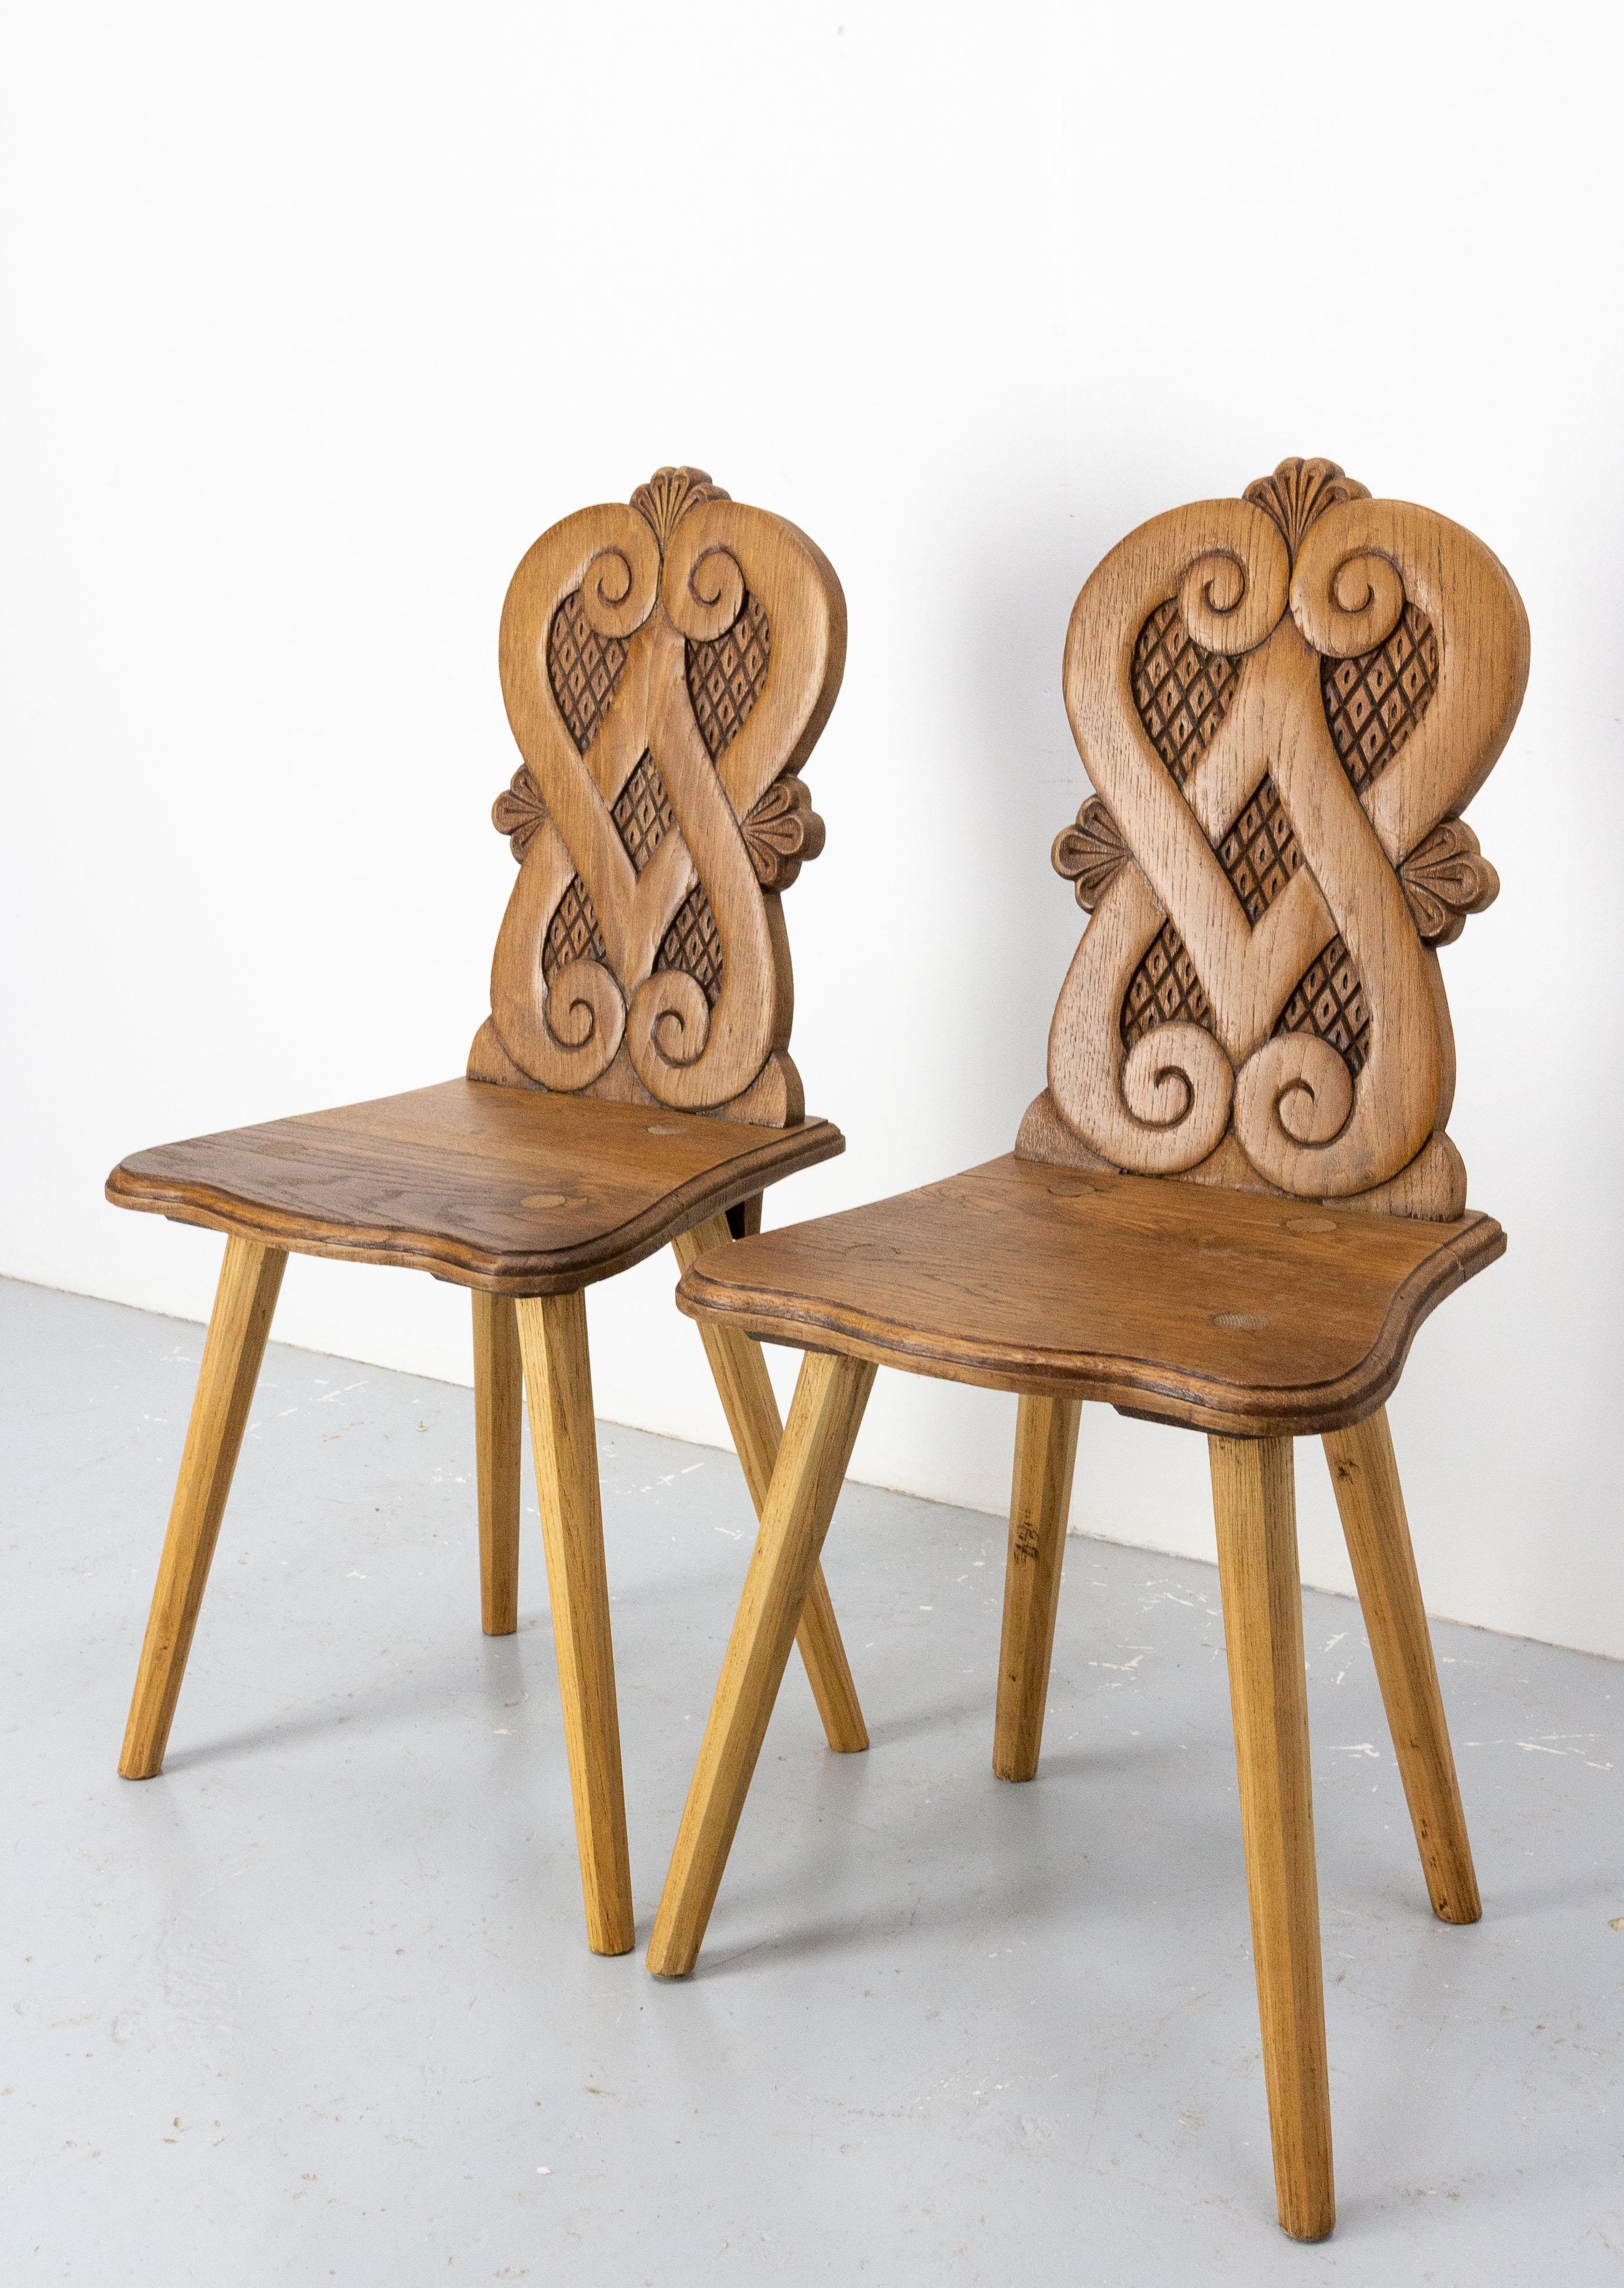 French Provincial Pair Dining Chairs Swiss Alp Escabelles Oak Brutalist Style, French, Late 19th C For Sale